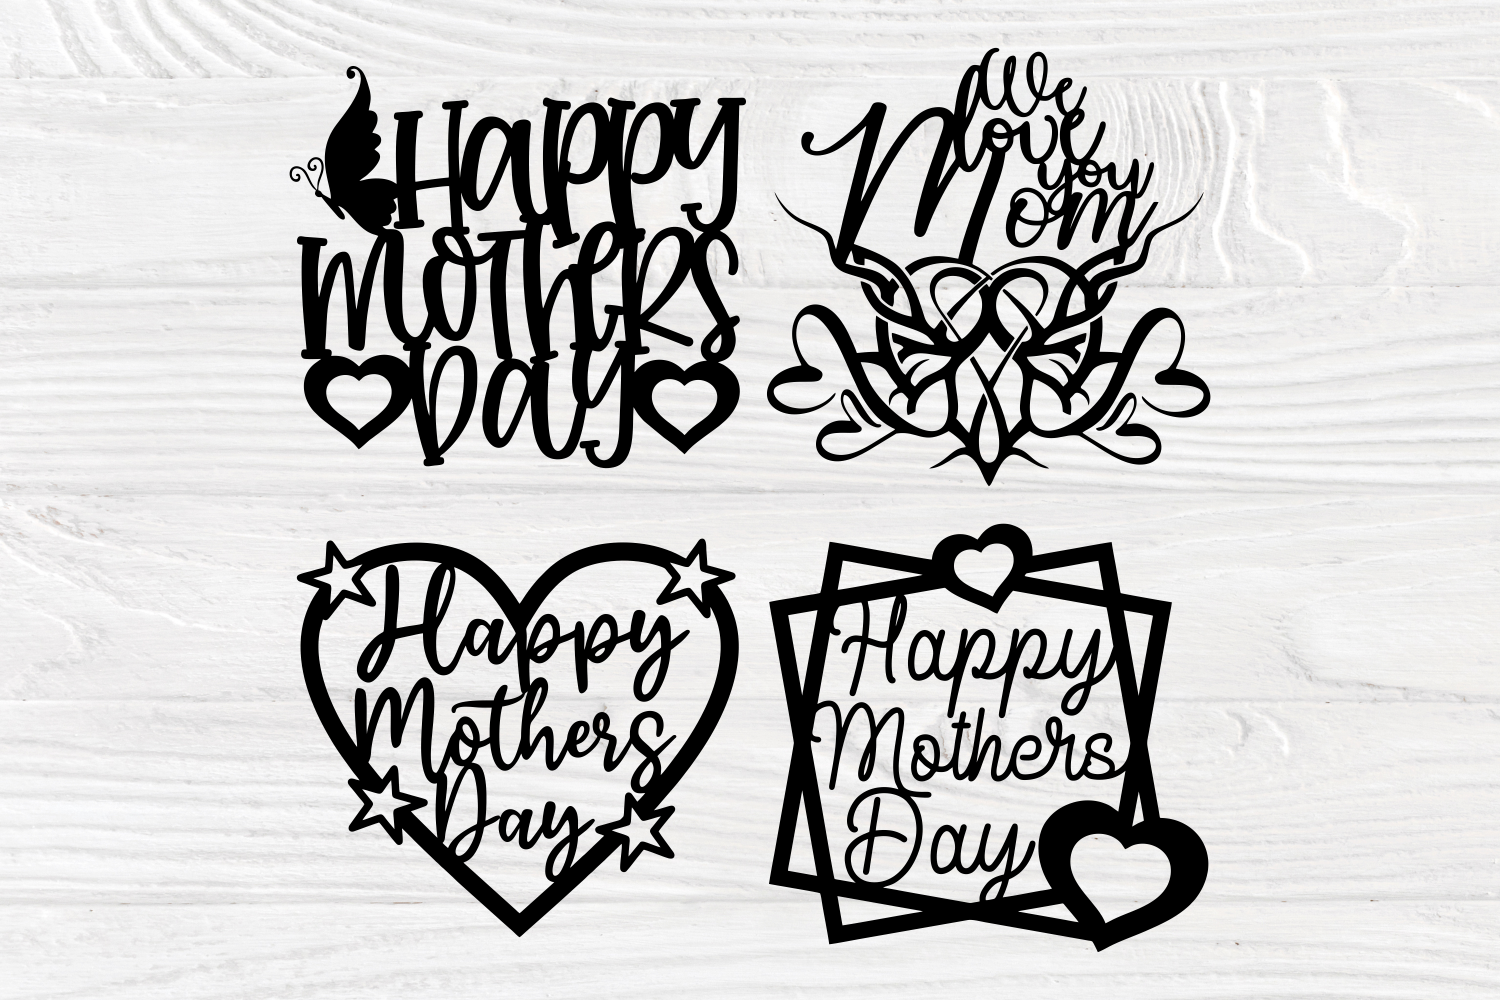 Mother's Day Cake Topper - I Love You Mom - Balloons4you - New Zealand  Party Decoration | Party Balloons Shop